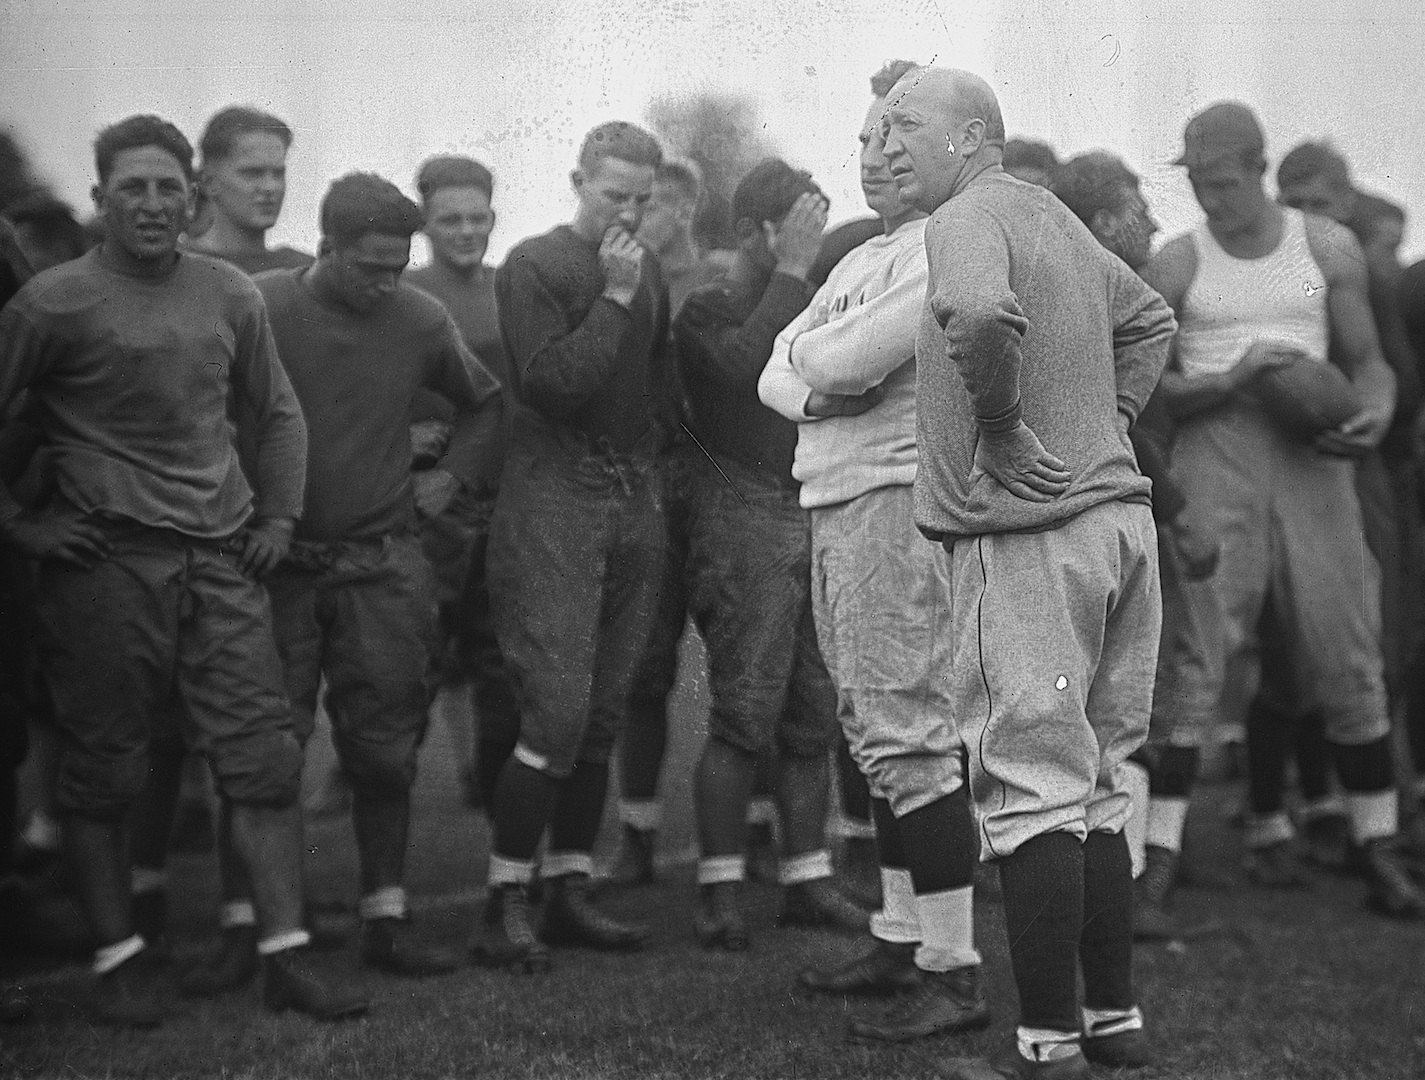 GBBY 45G/0382: Football Coach Knute Rockne at practice with players, c1920s.